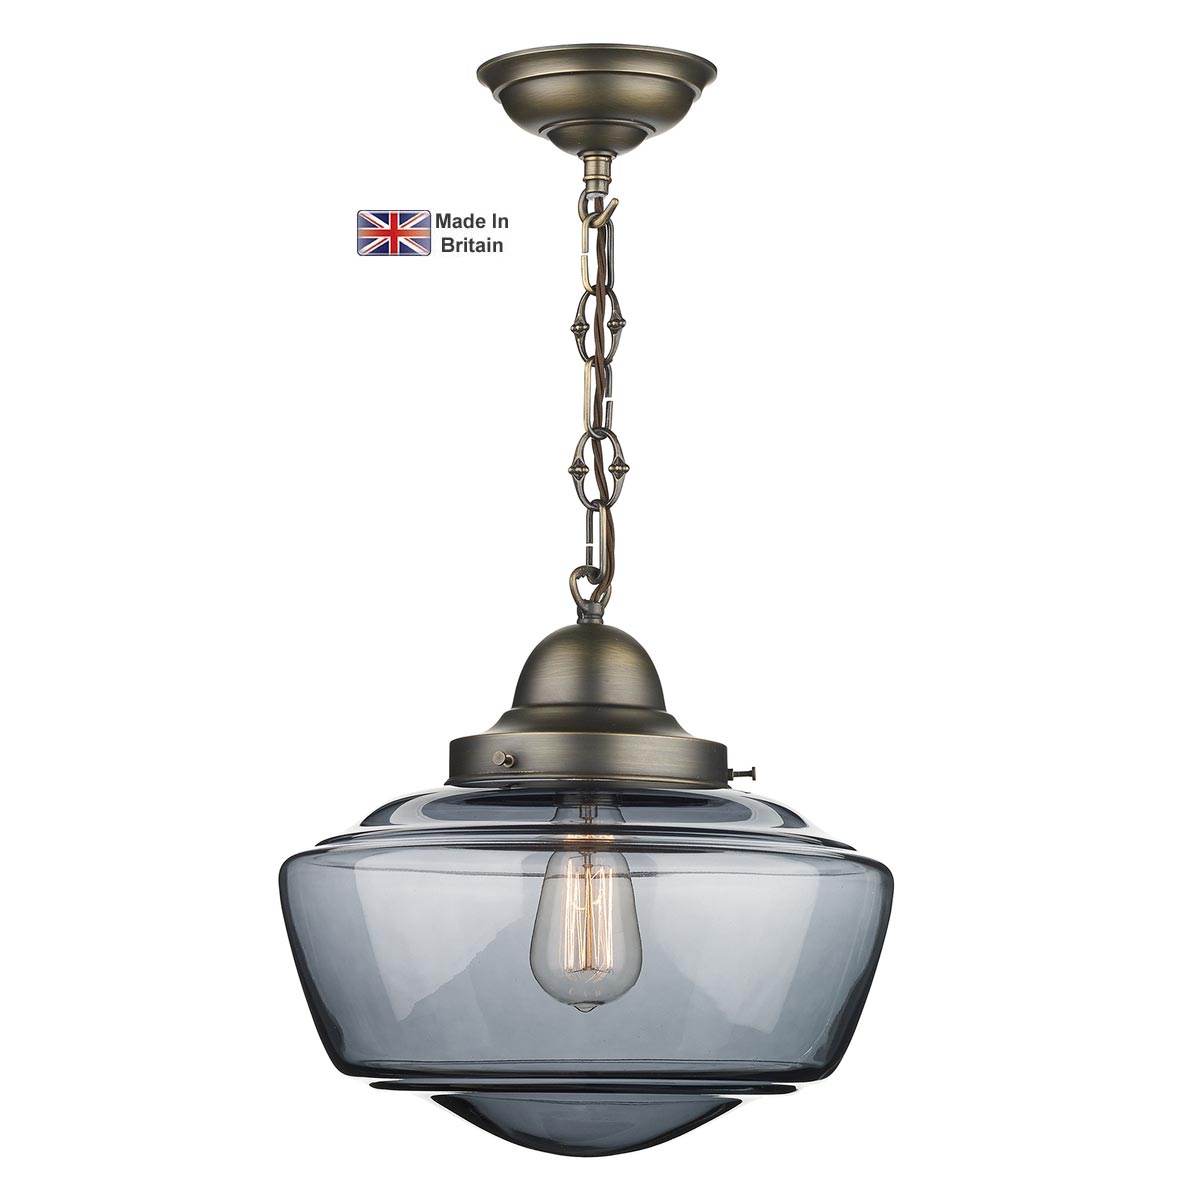 David Hunt Stowe Solid Brass 1 Light Ceiling Pendant Smoked Glass